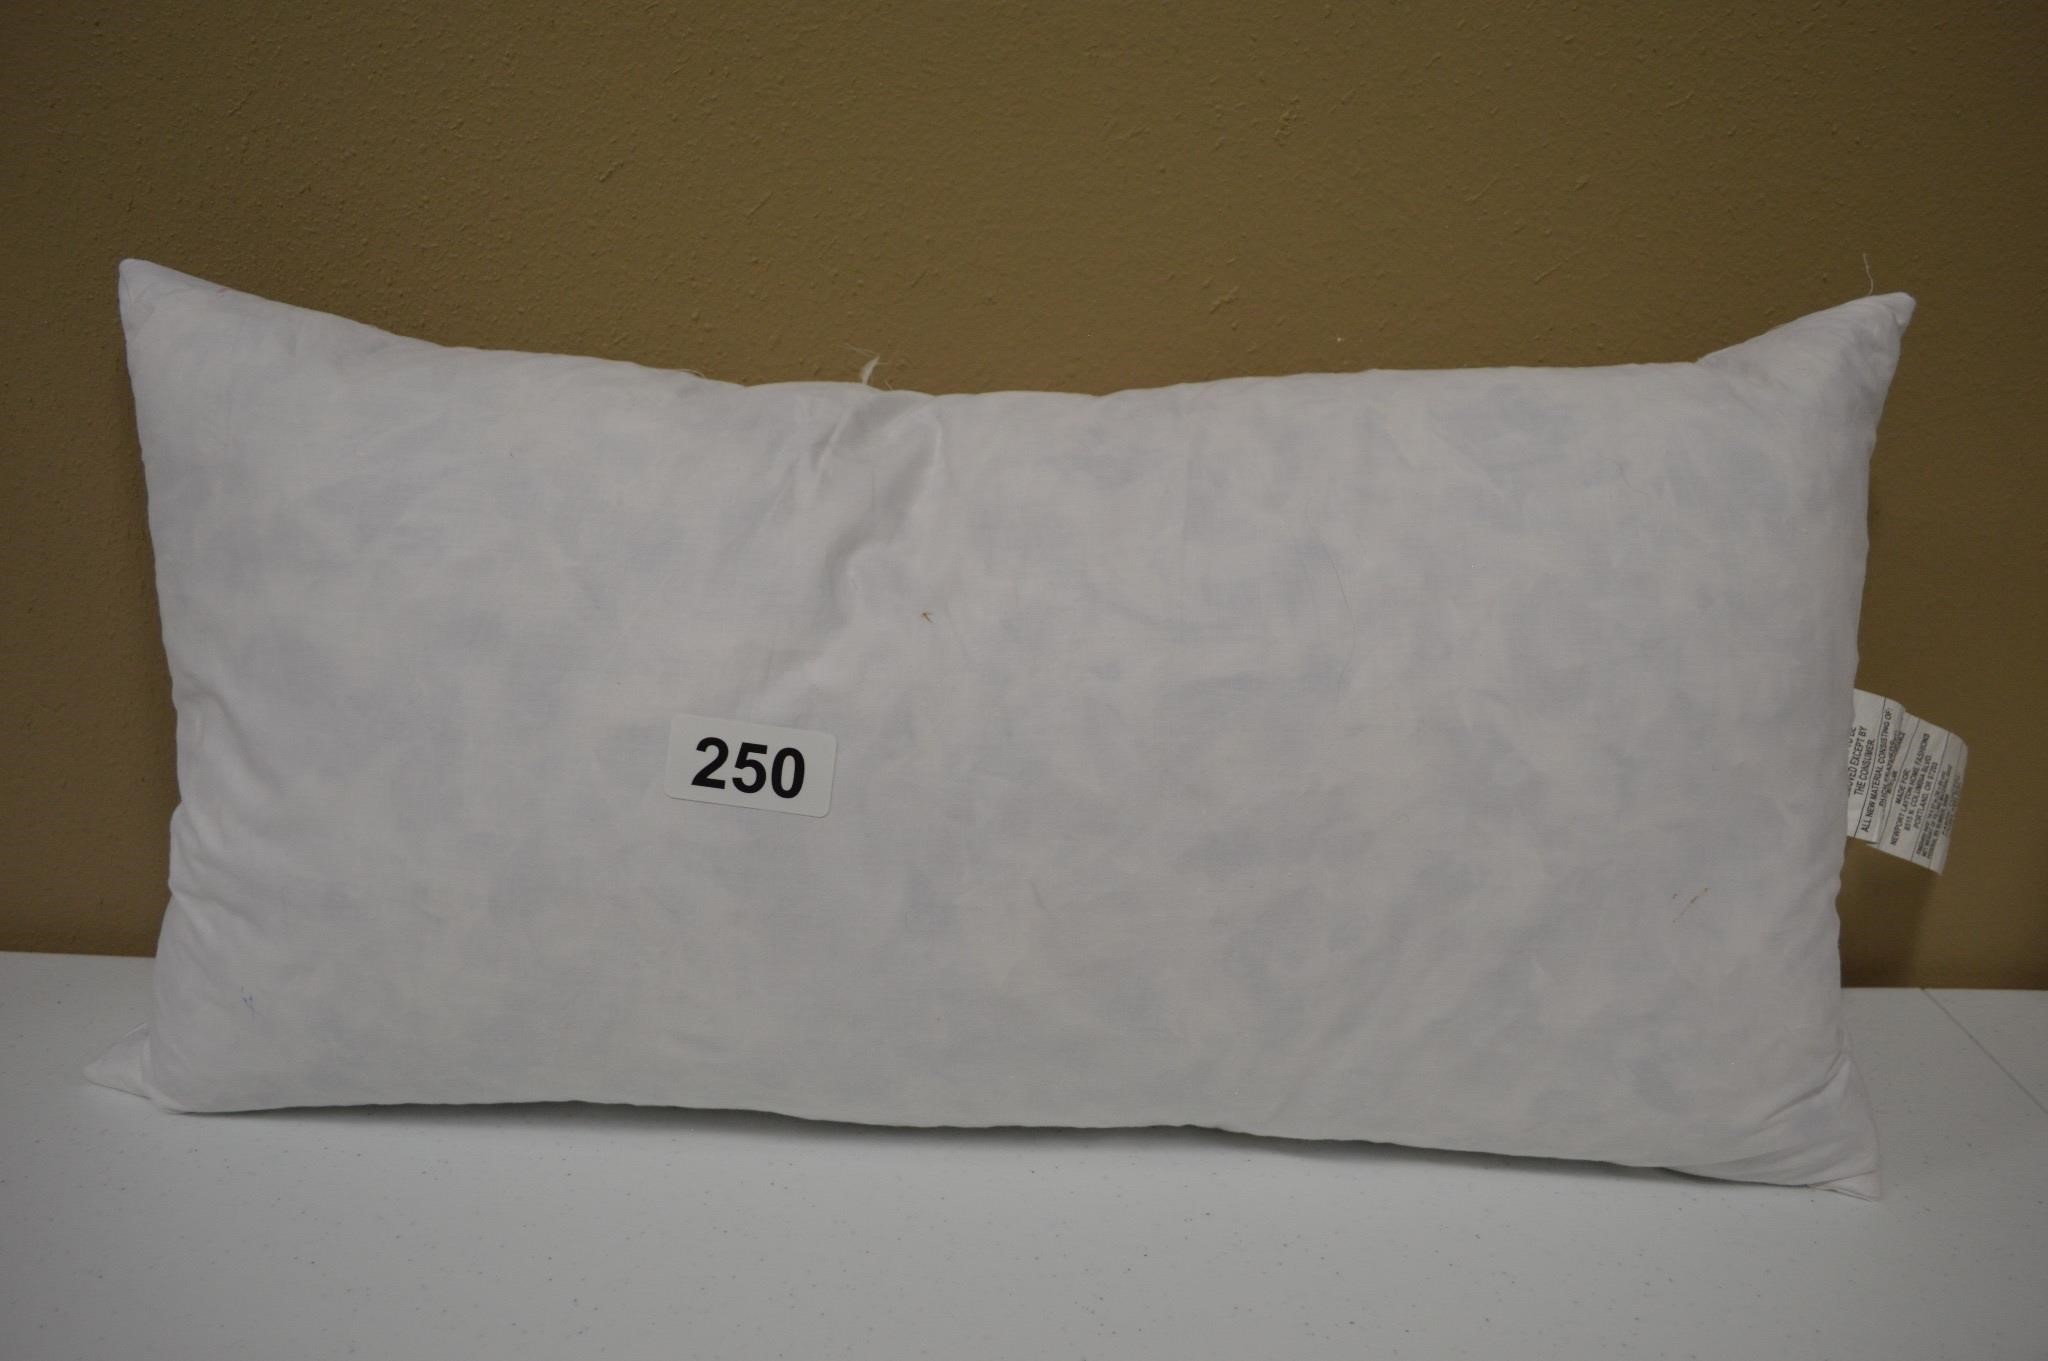 rectangle down feather pillow 24” x 14” - clean